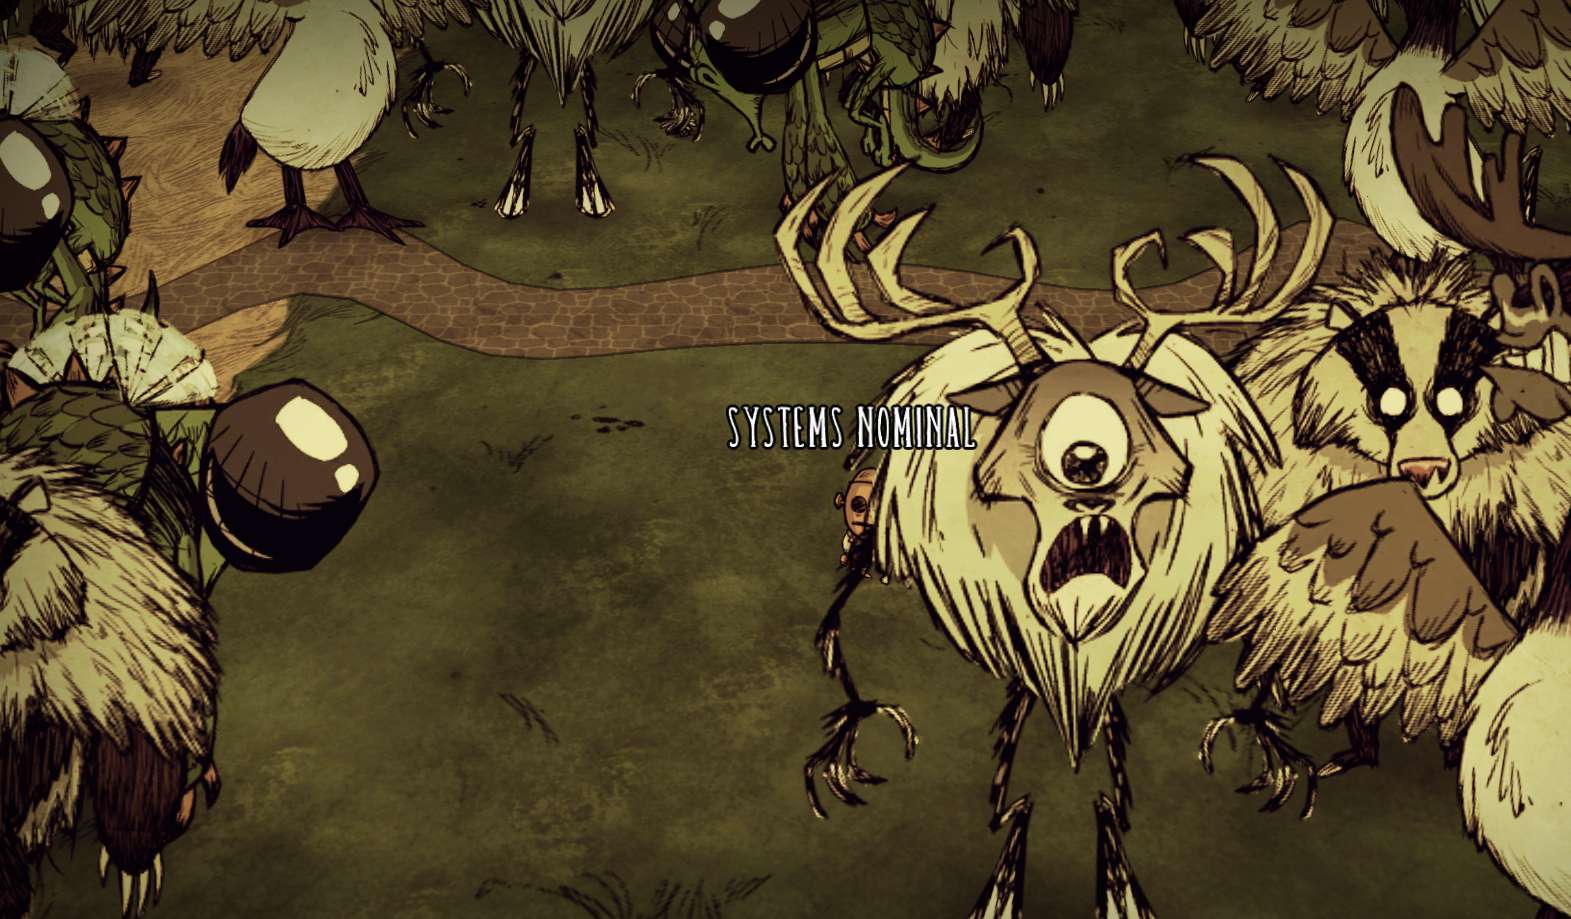 Don t starve фон